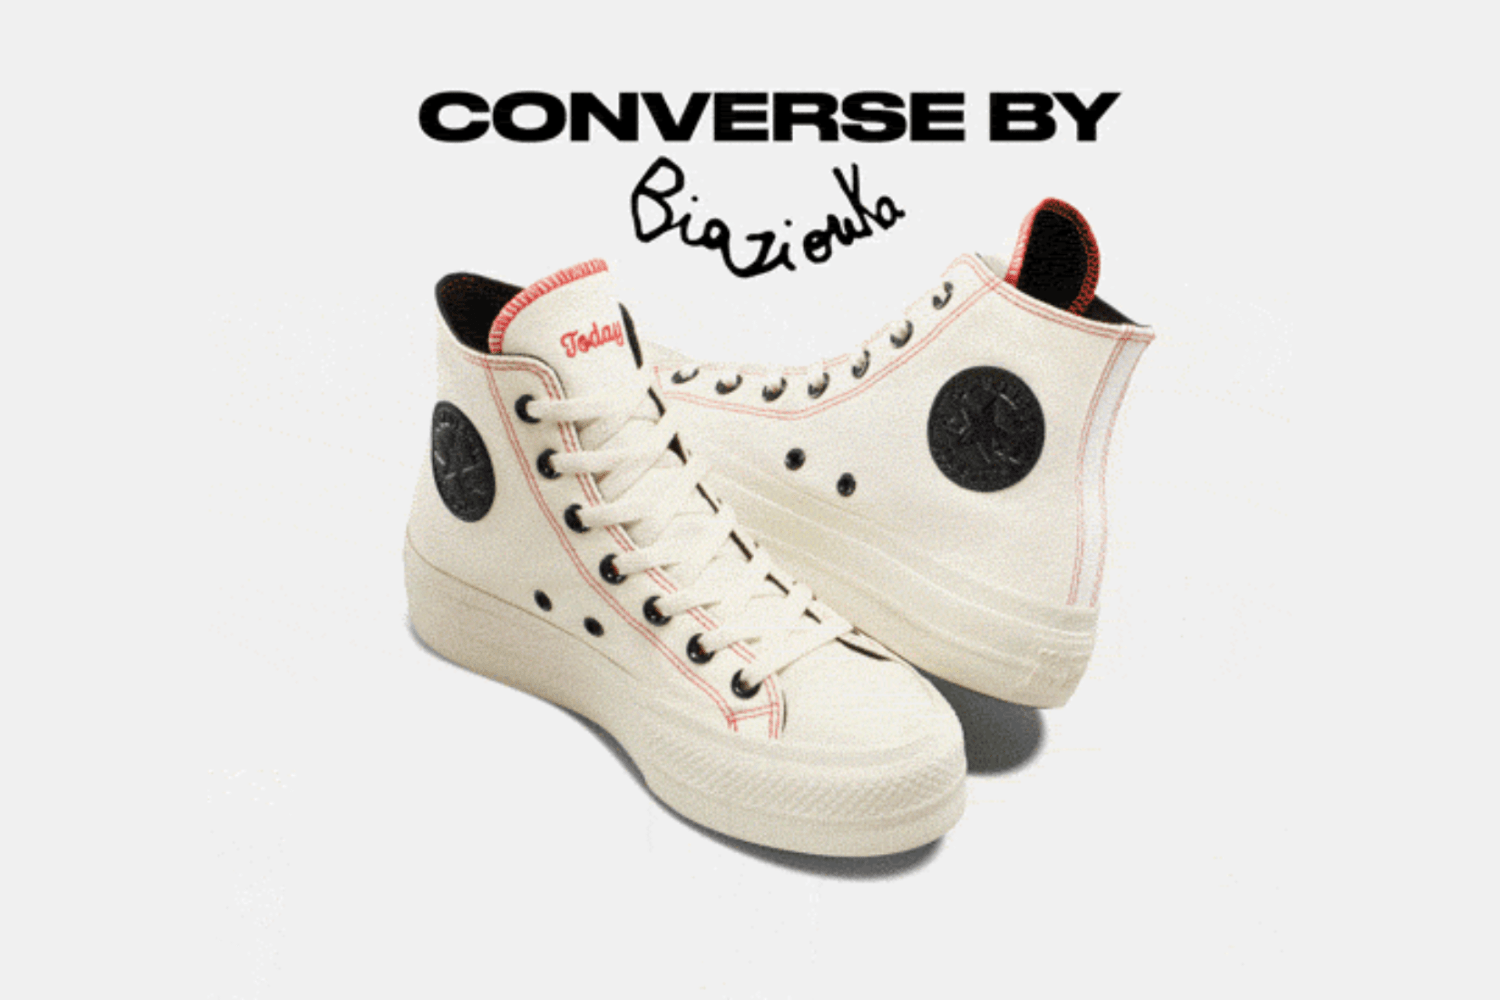 Take a look at the Converse By You chosen By Biaziouka